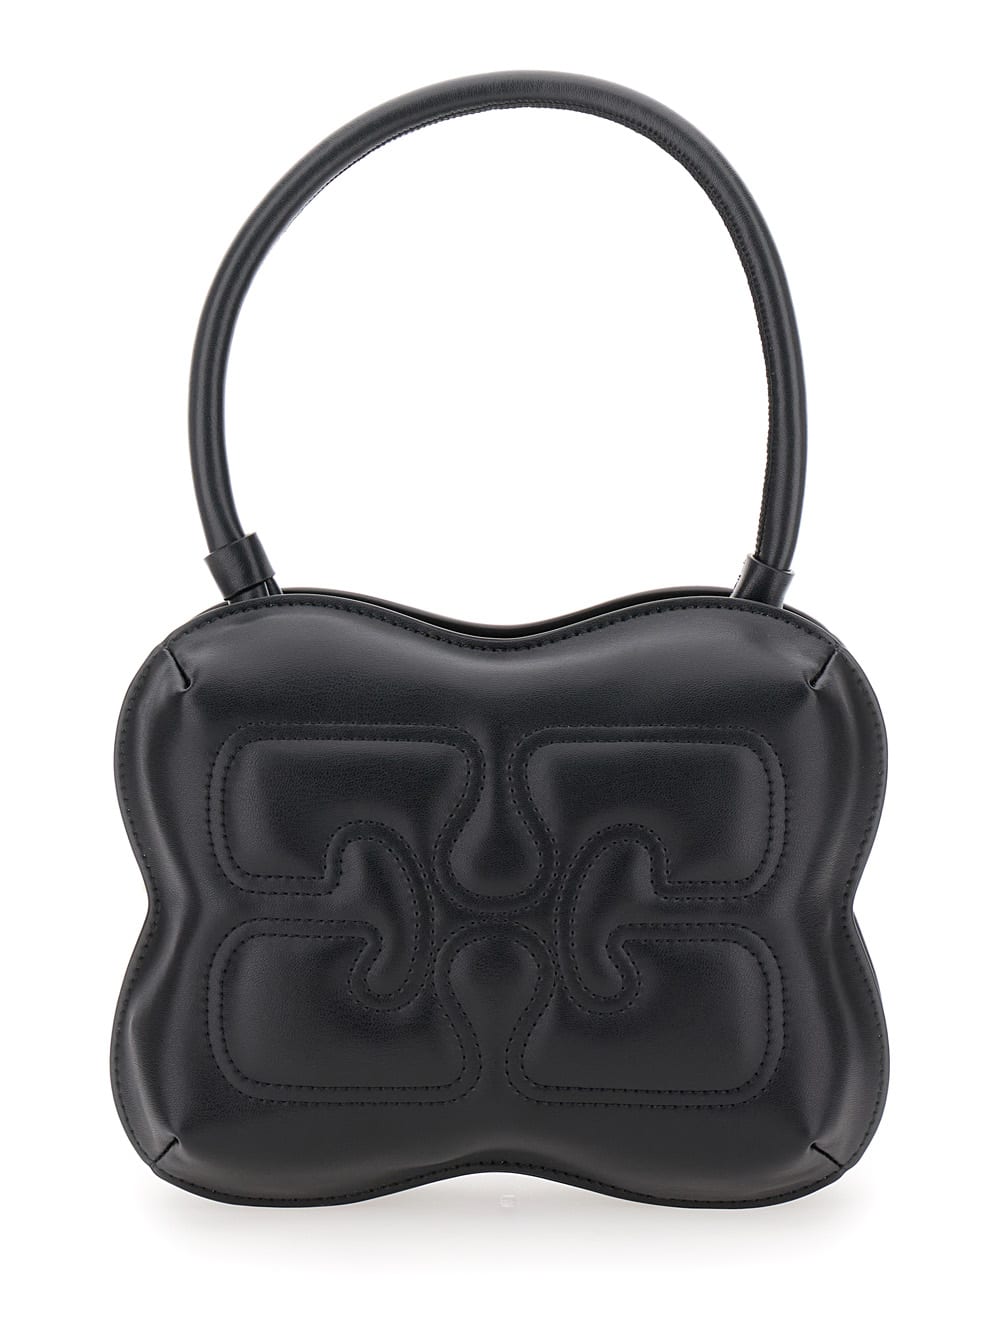 GANNI BUTTERFLY BLACK HANDBAG WITH LOGO DETAIL IN LEATHER WOMAN